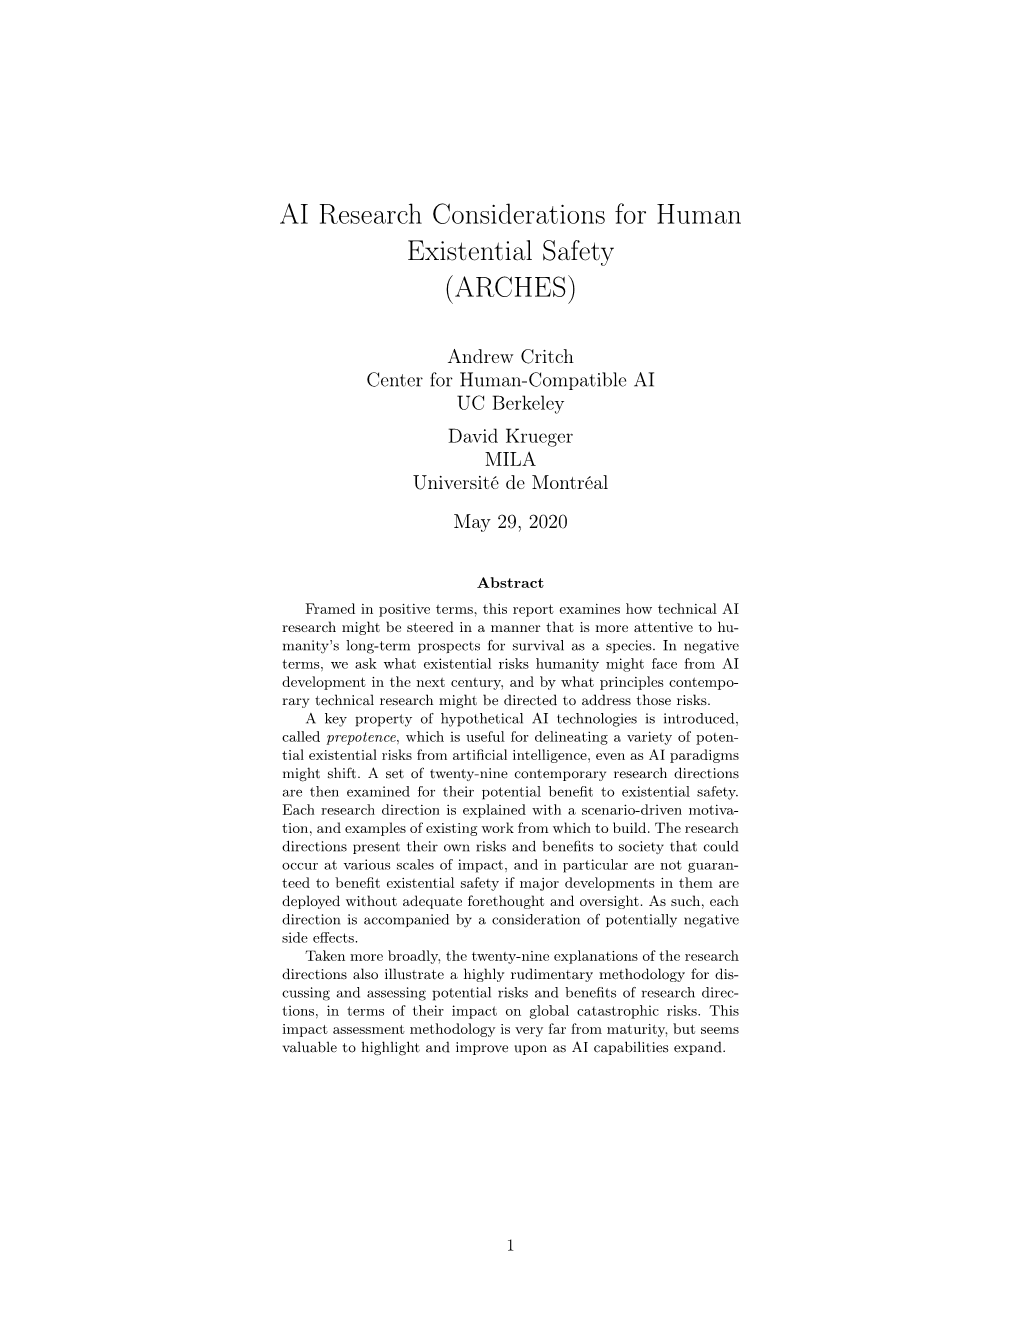 AI Research Considerations for Human Existential Safety (ARCHES)